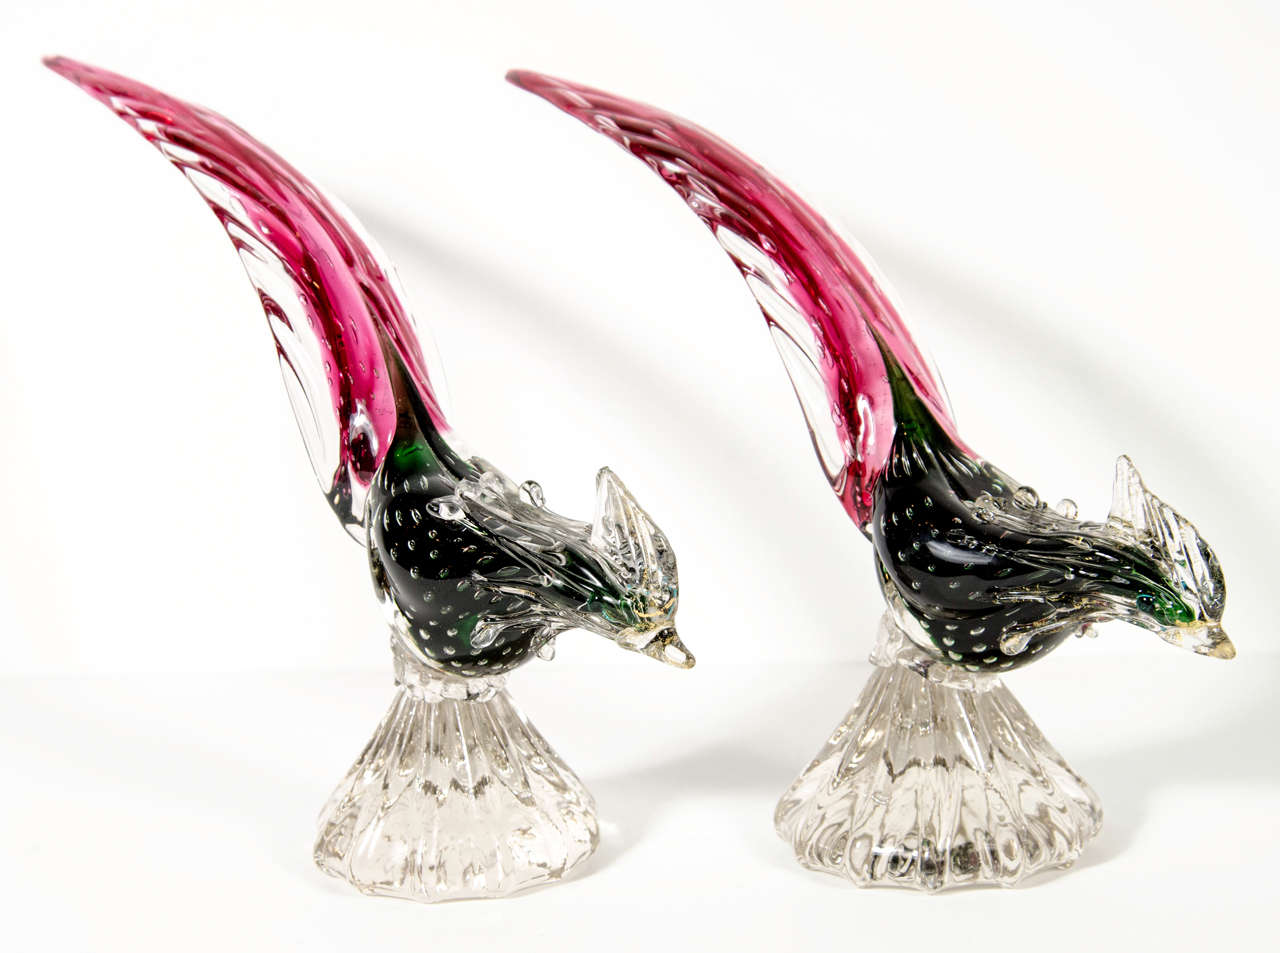 These gorgeous hand blown murano glass pheasants feature hues of scarlett tail feathers and an emerald green body with hand blown murines. Ribbed pedestal design. Excellent condition.

Italy, Circa 1950

Dimensions:
3.5